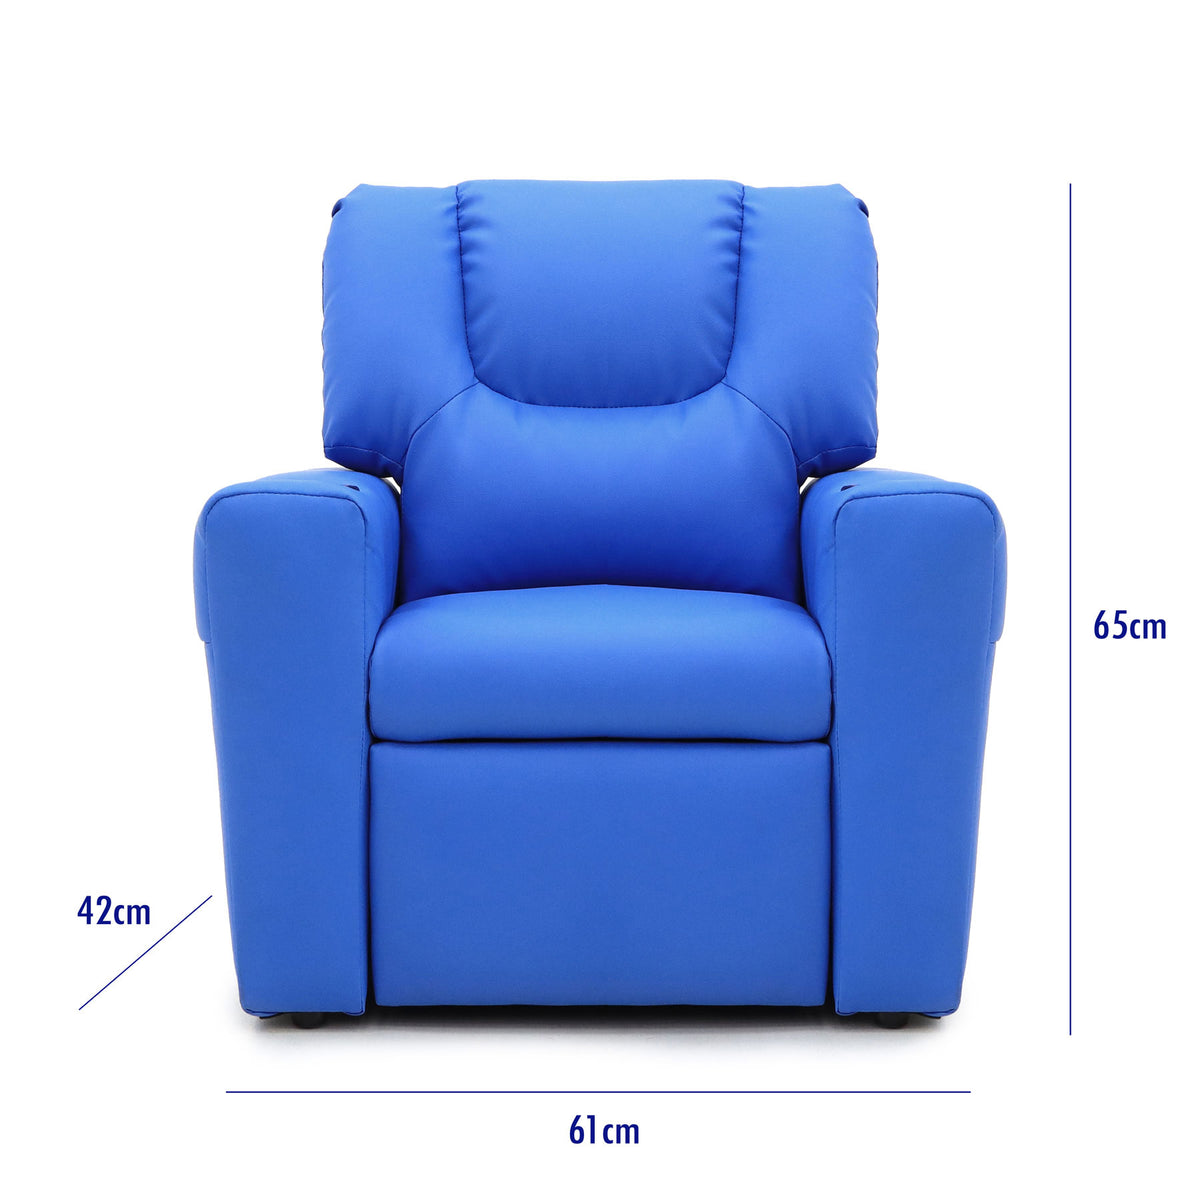 Image of the blue kids recliner chair with measurements provided: 42cm x 61cm x65cm